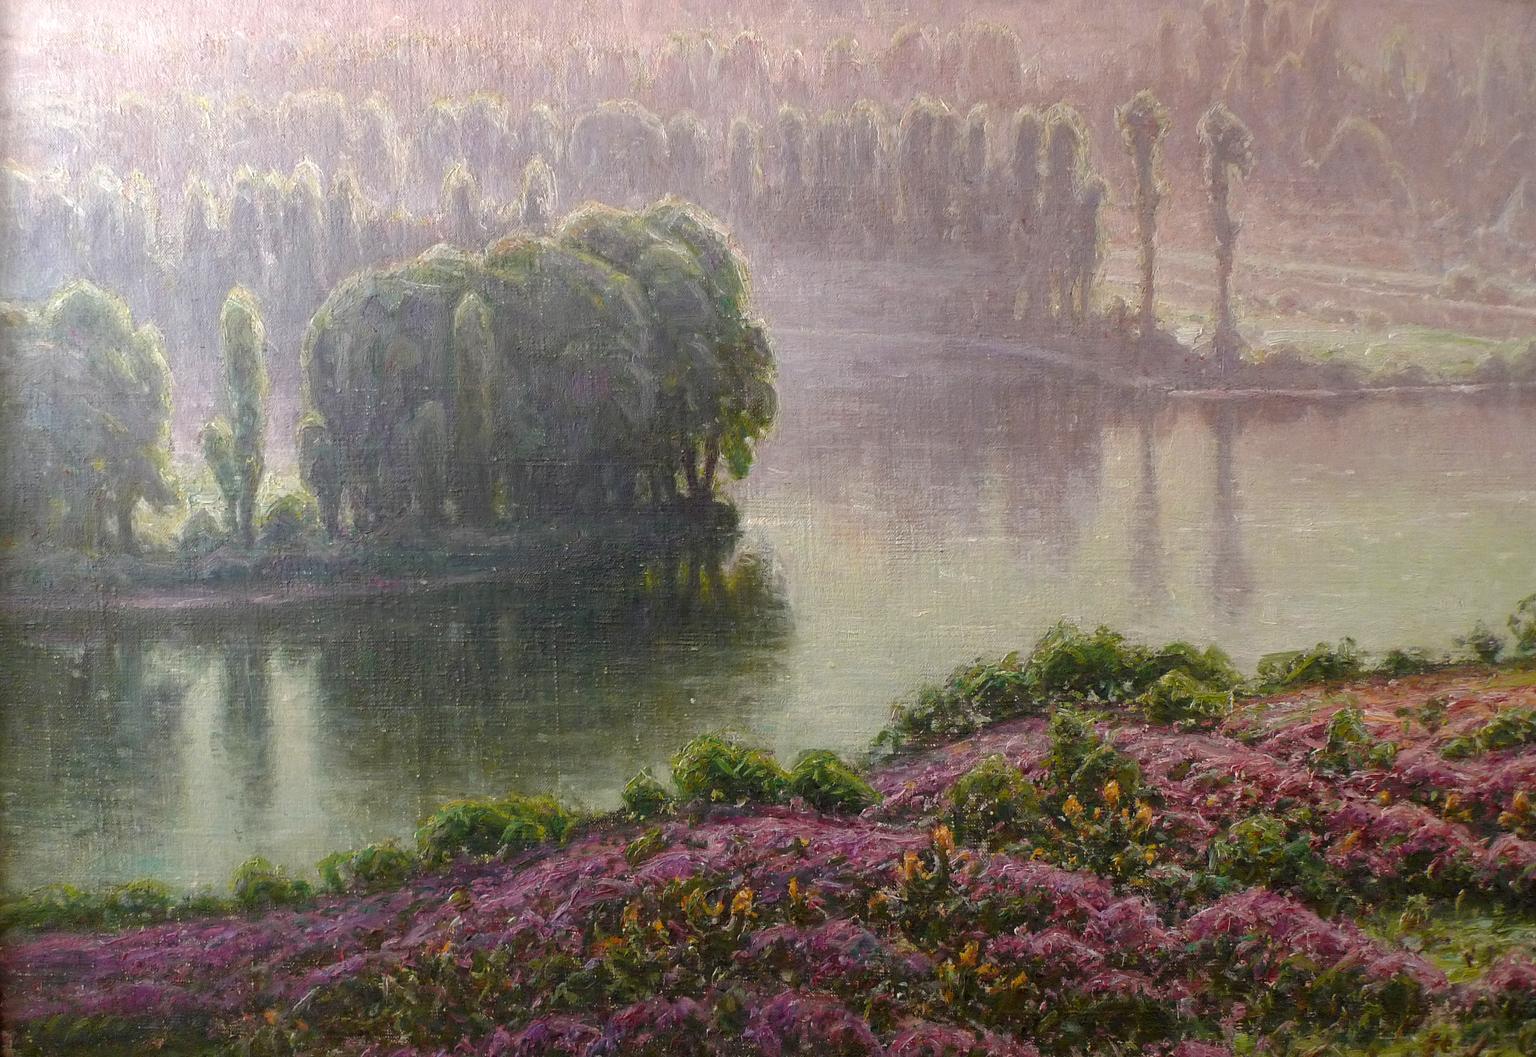 WILLIAM DIDIER - POUGET 
French, 1864 - 1959
BRUYÈRES EN FLEURS
signed and dated “Didier-Pouget / 1949” (lower right)
inscribed, located and signed ““Le Malin dans la vallée du Lot.” (France) / (Bruyères en fleurs.) / dP. 49. 890. L. F.” (on the